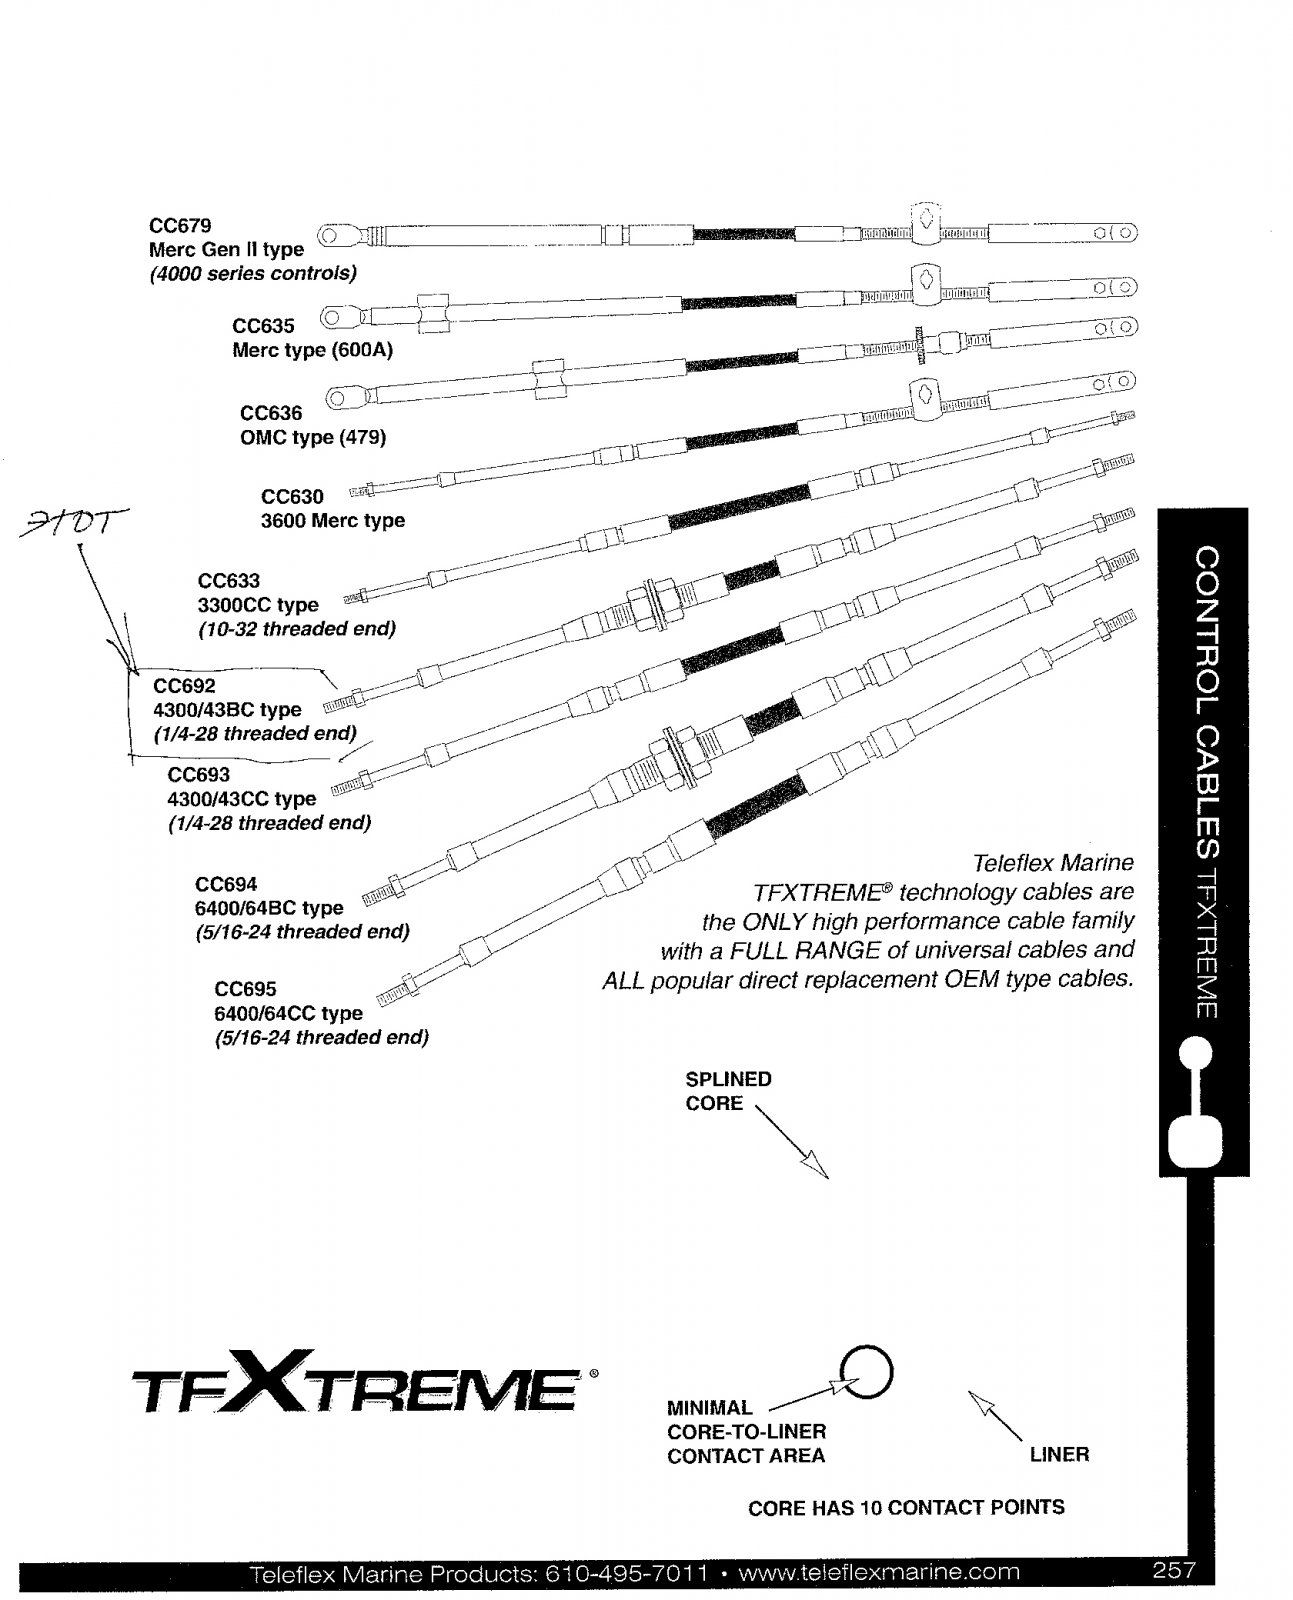 TFXtreme push-pull cables.jpg